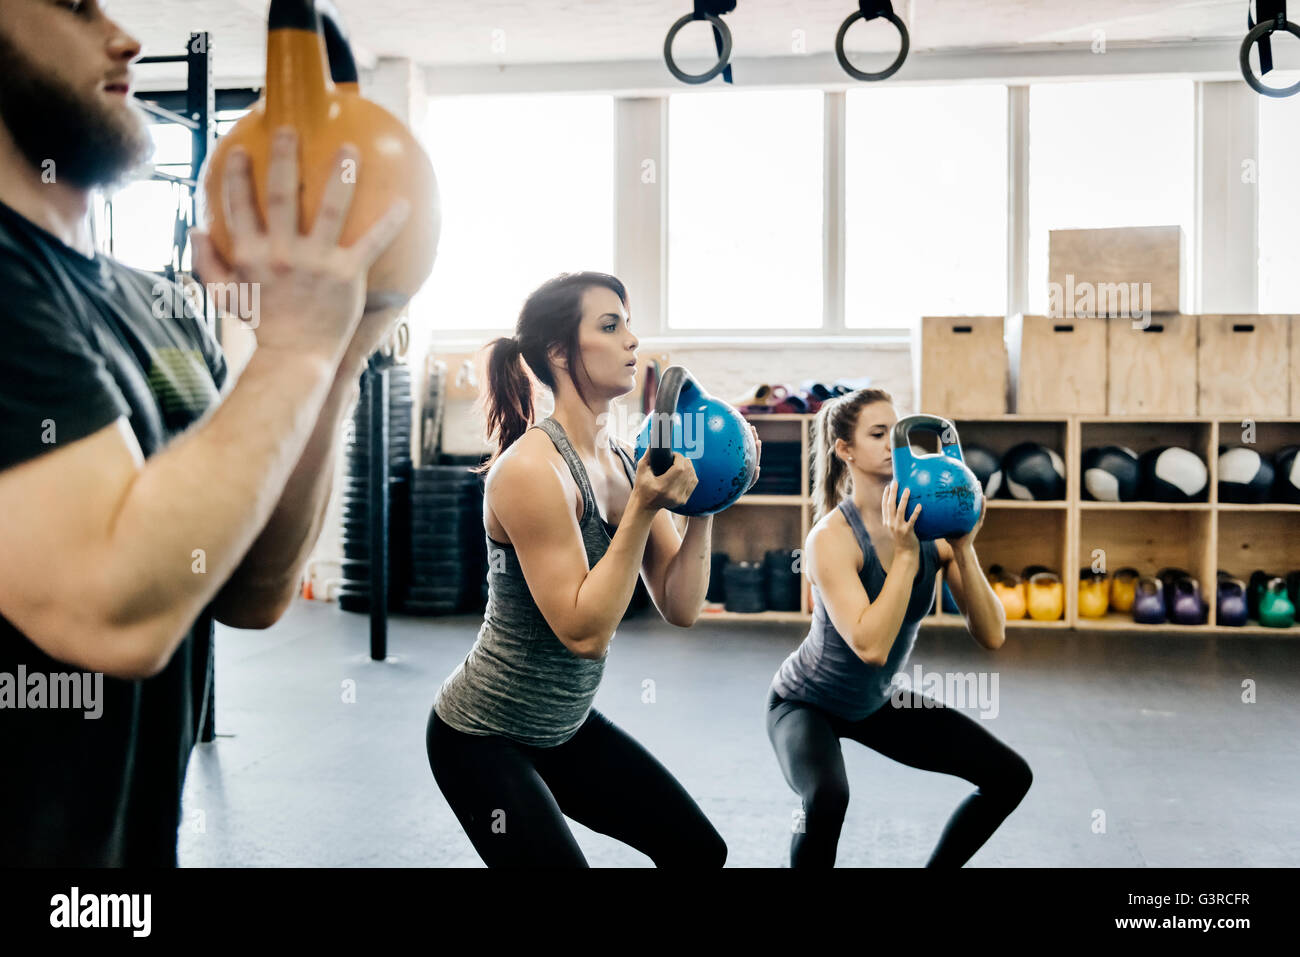 Germany, Young women and man cross training with kettlebells in gym Stock Photo